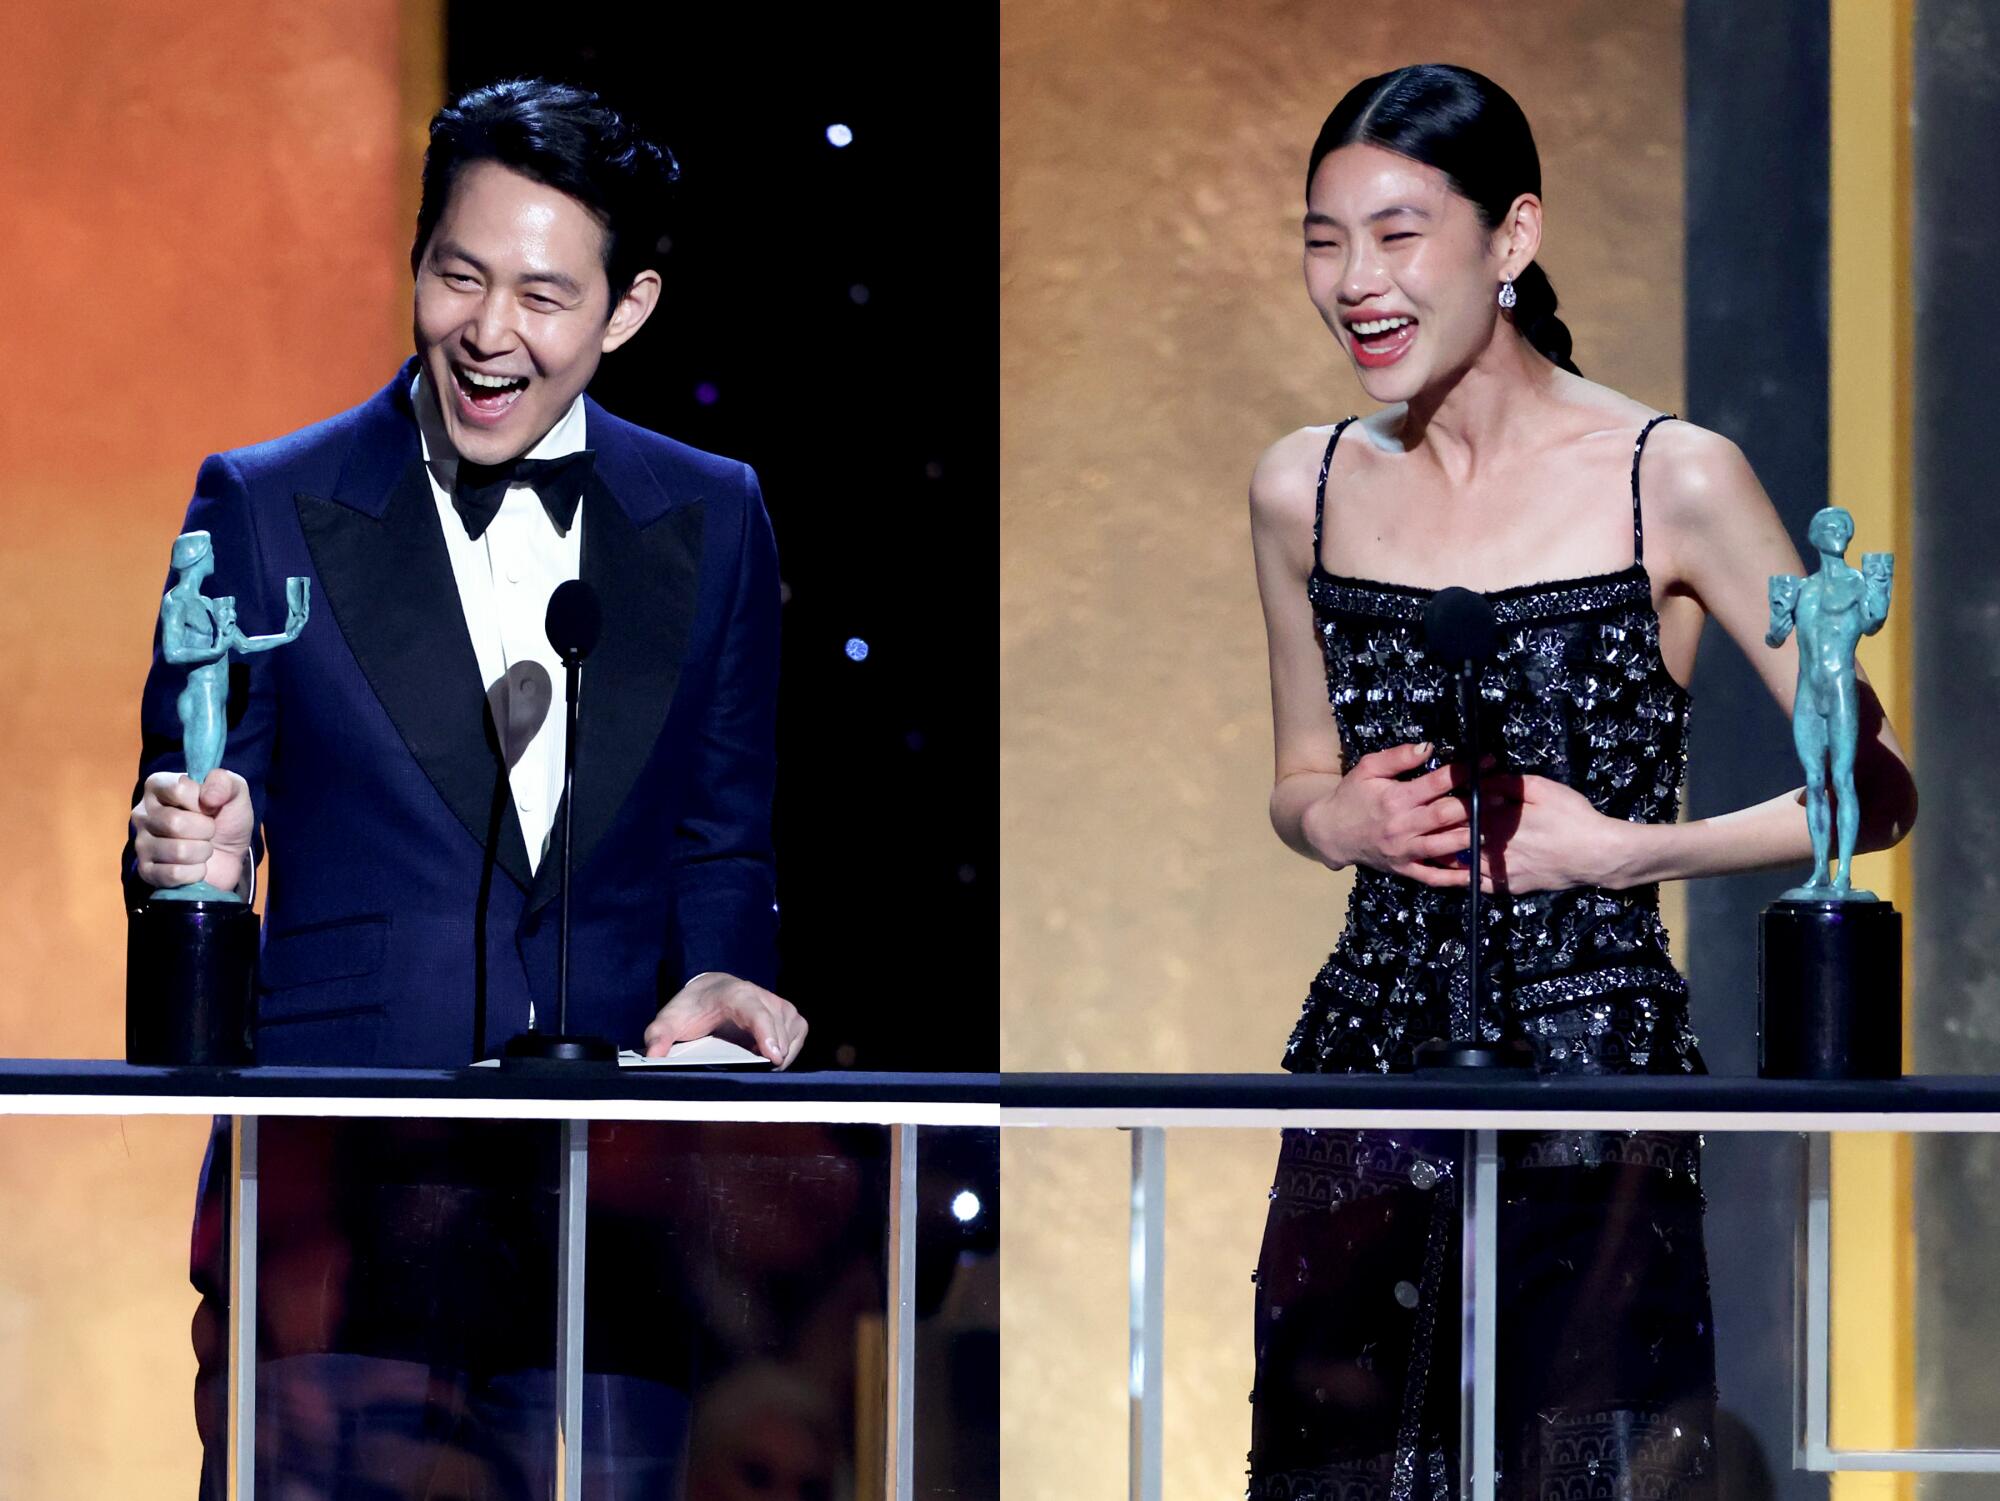 "Squid Game's" Lee Jung-jae and Jung Ho-yeon are shown alongside their SAG awards.